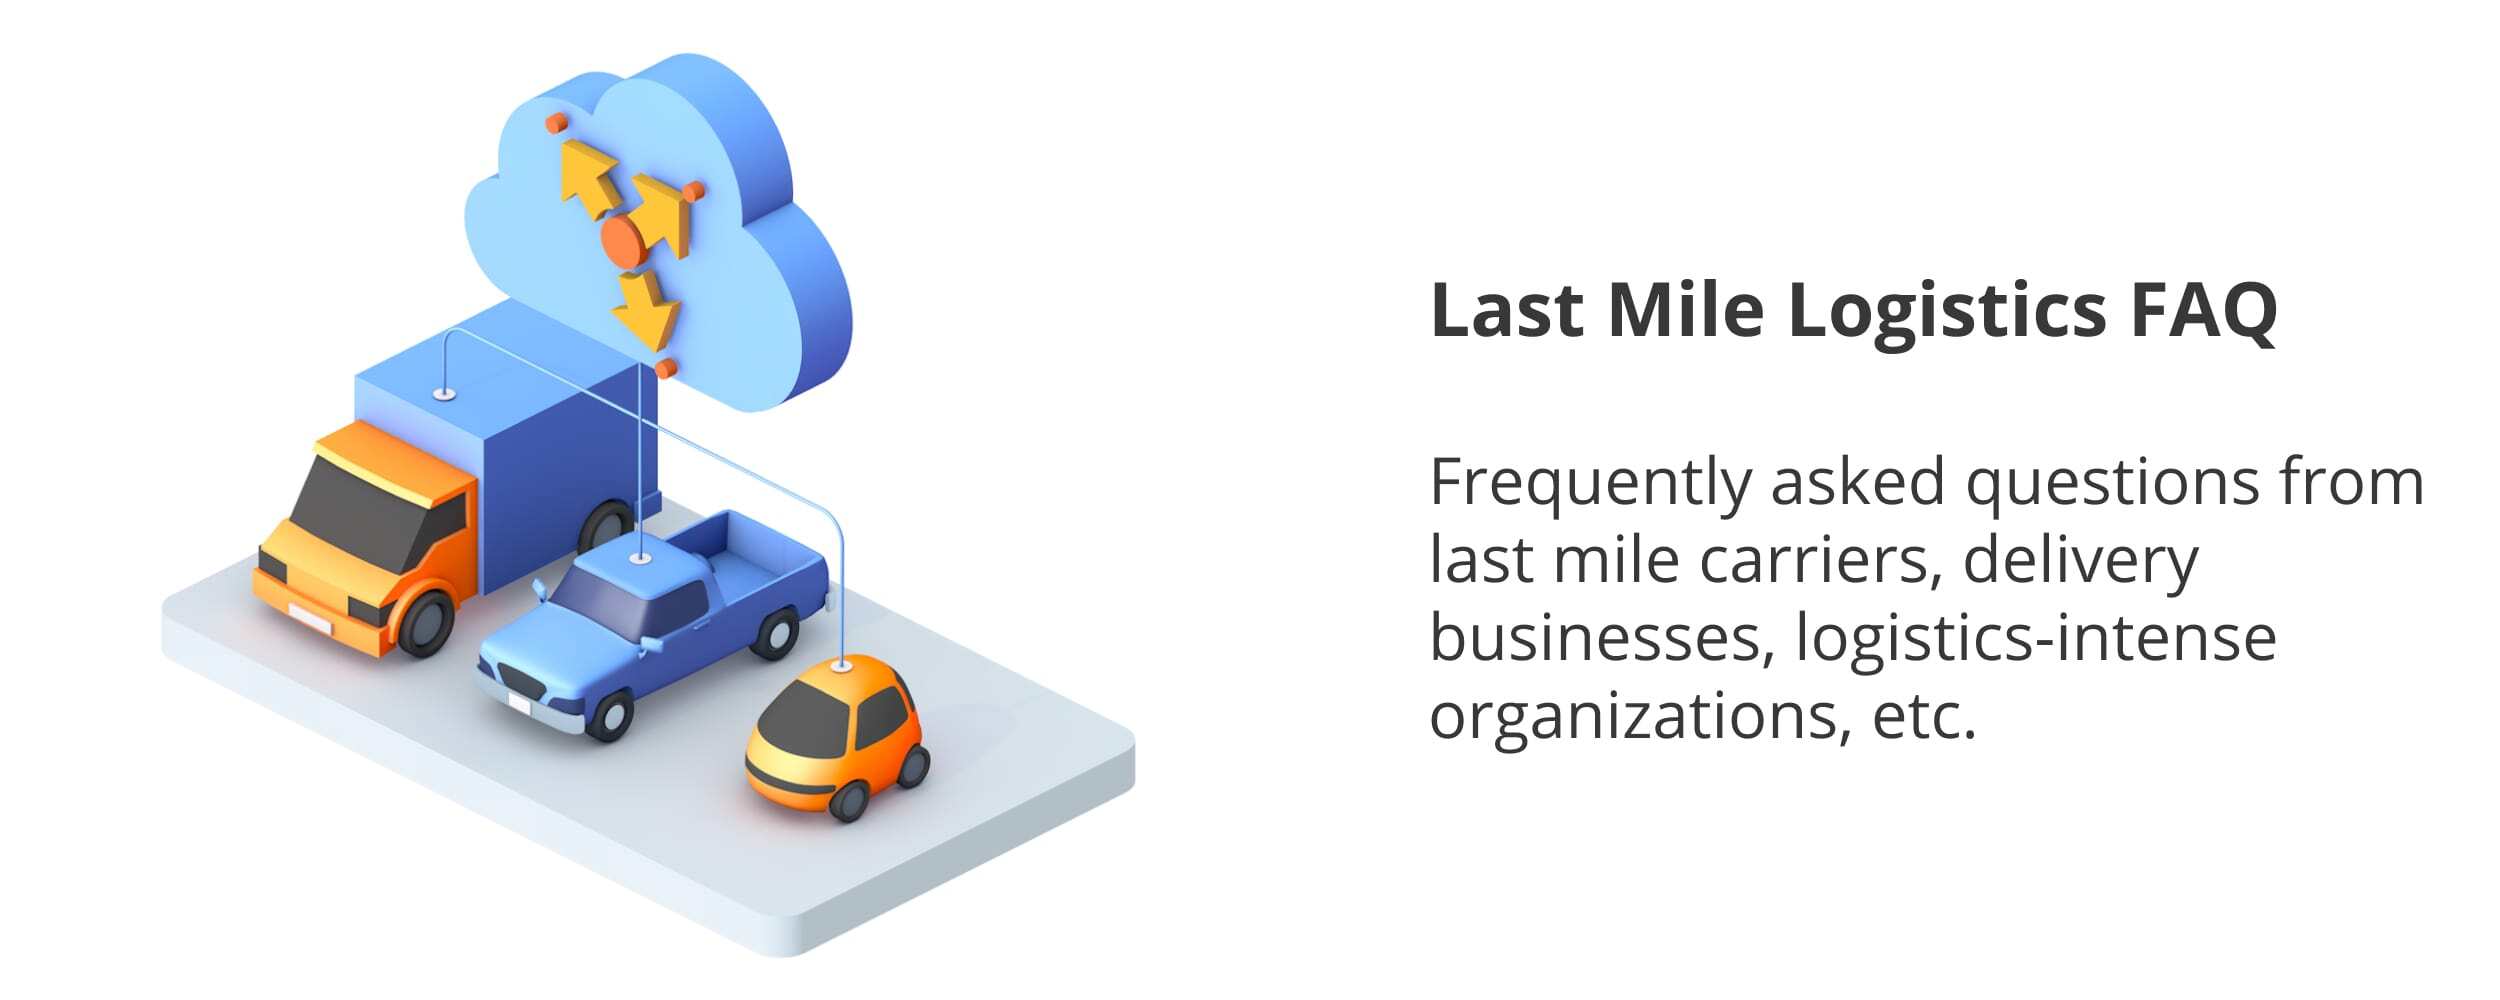 The most frequently asked questions about last mile logistics asked by Route4Me customers.